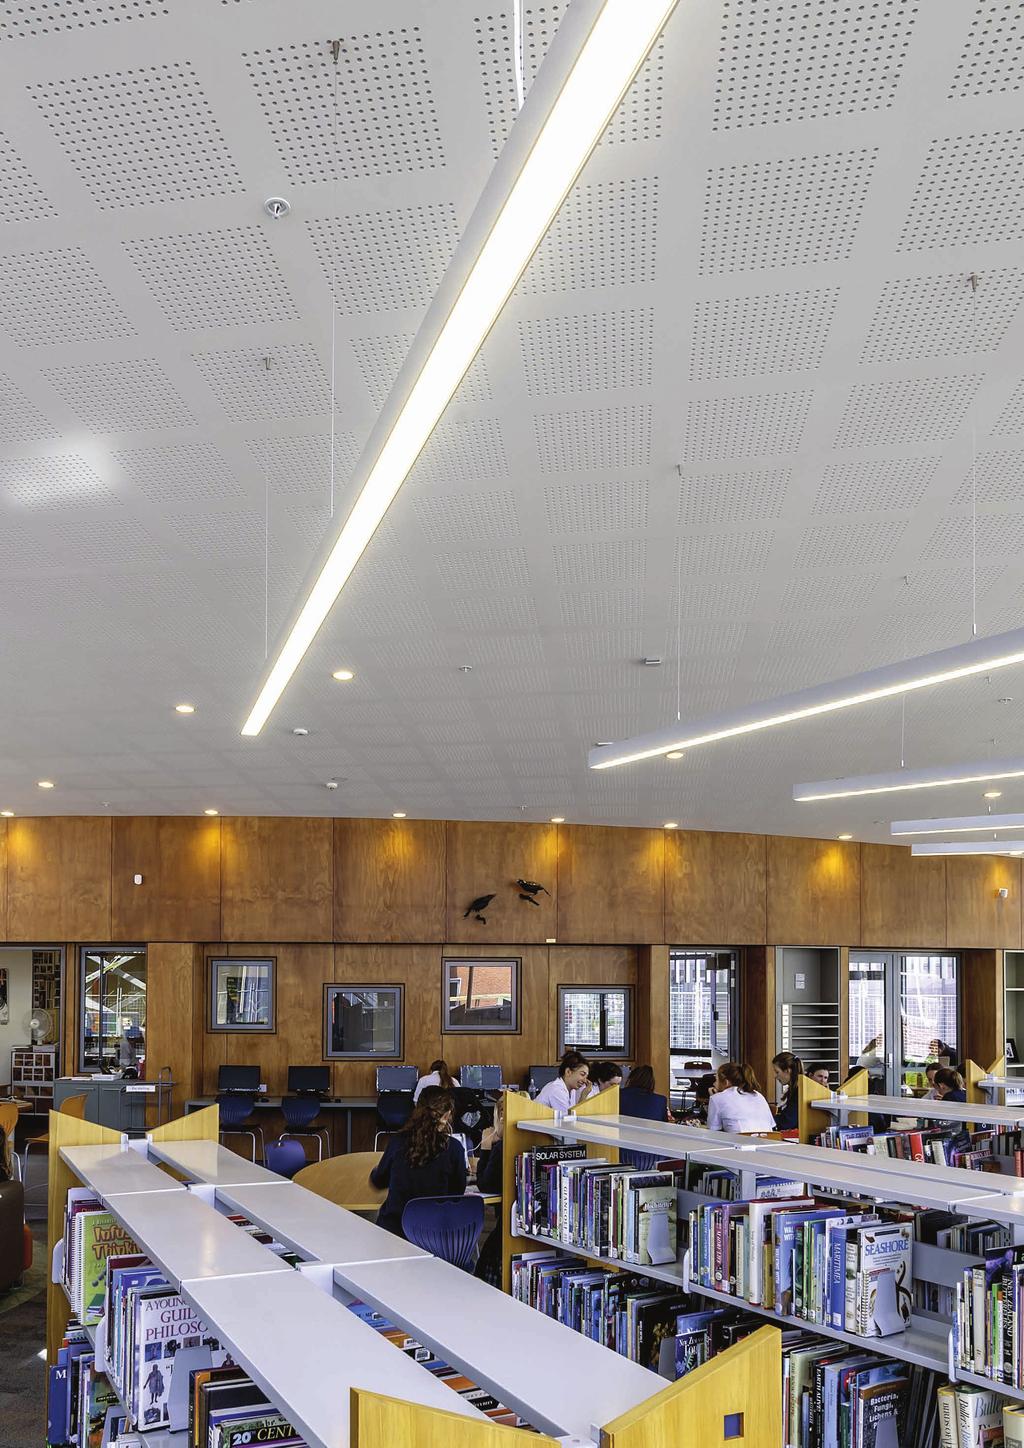 GIB Reverberation Control Systems combine an innovative, efficient method to improve the quality of sound within a space with the great look of GIB Quietline and GIB Tone Quiet ceiling tiles.